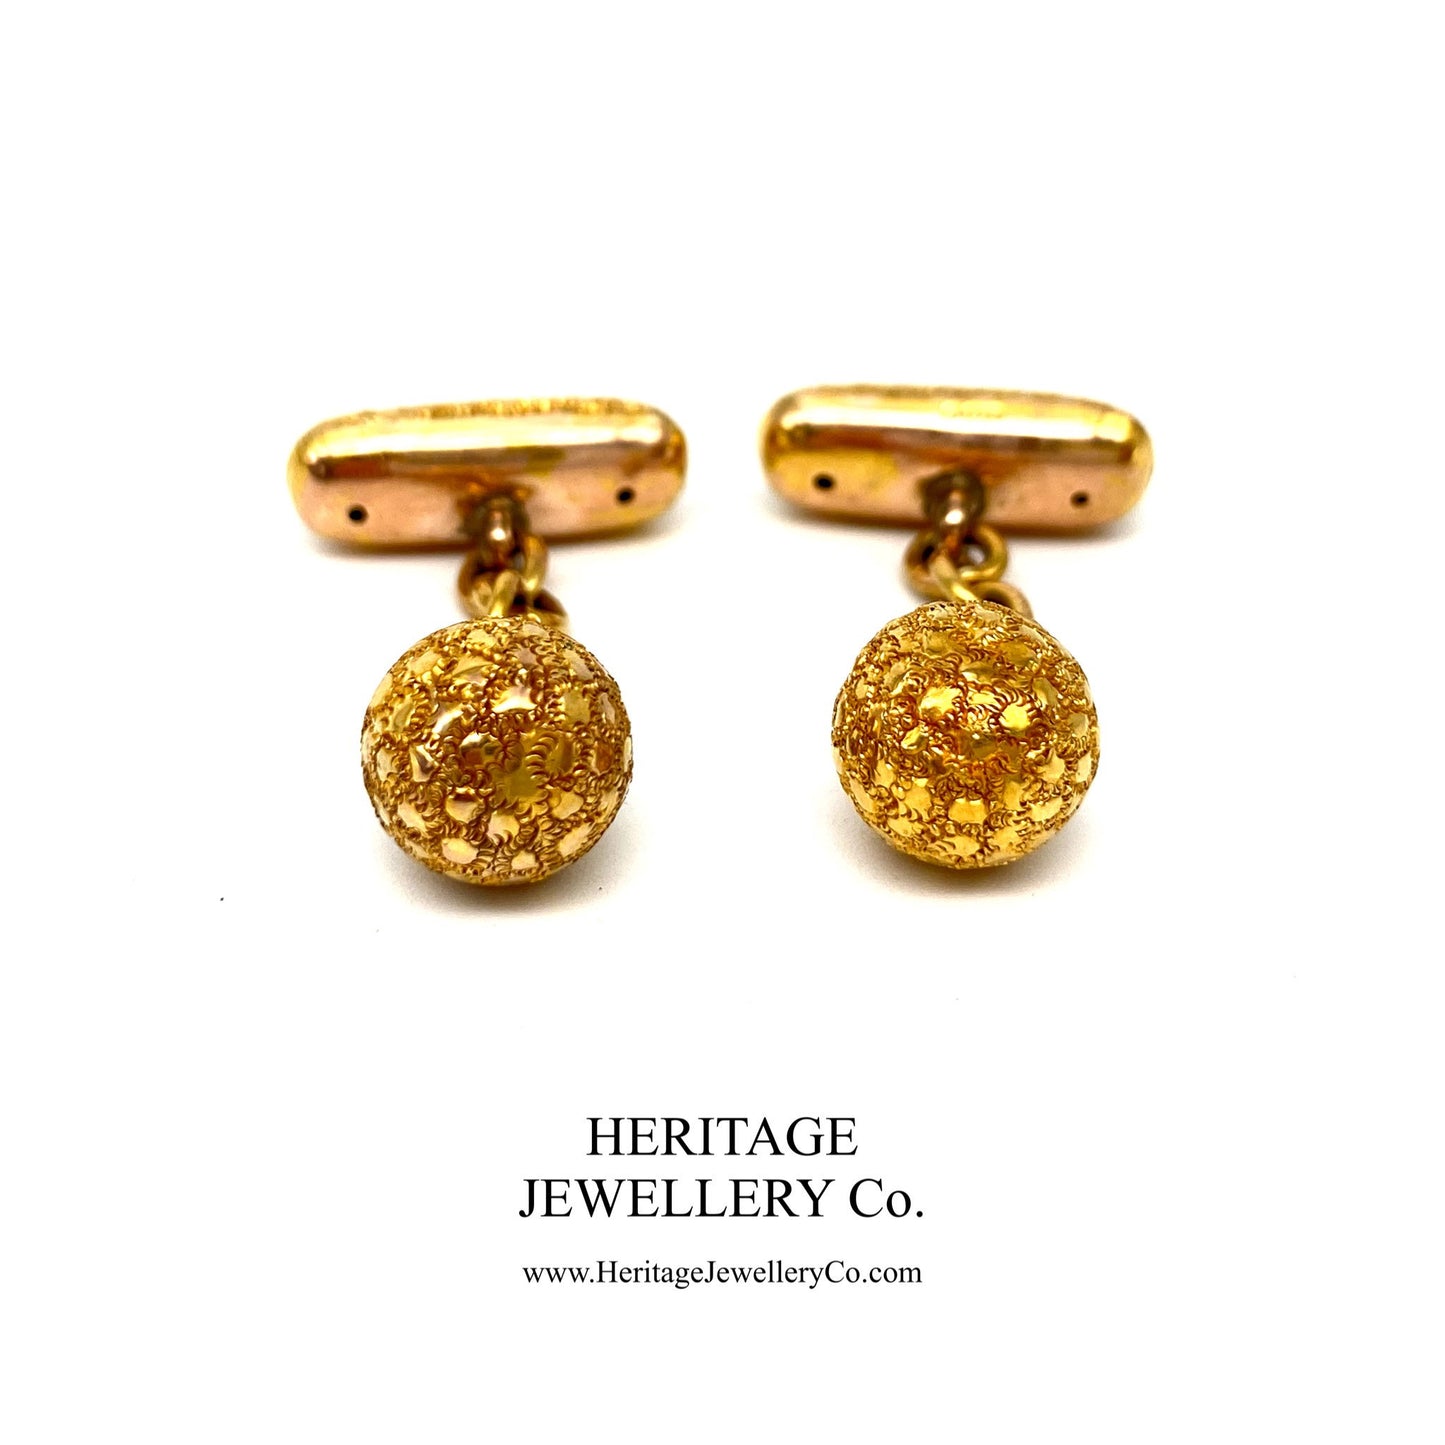 Rare Victorian Gold Cufflinks with Antique Box (9ct gold)